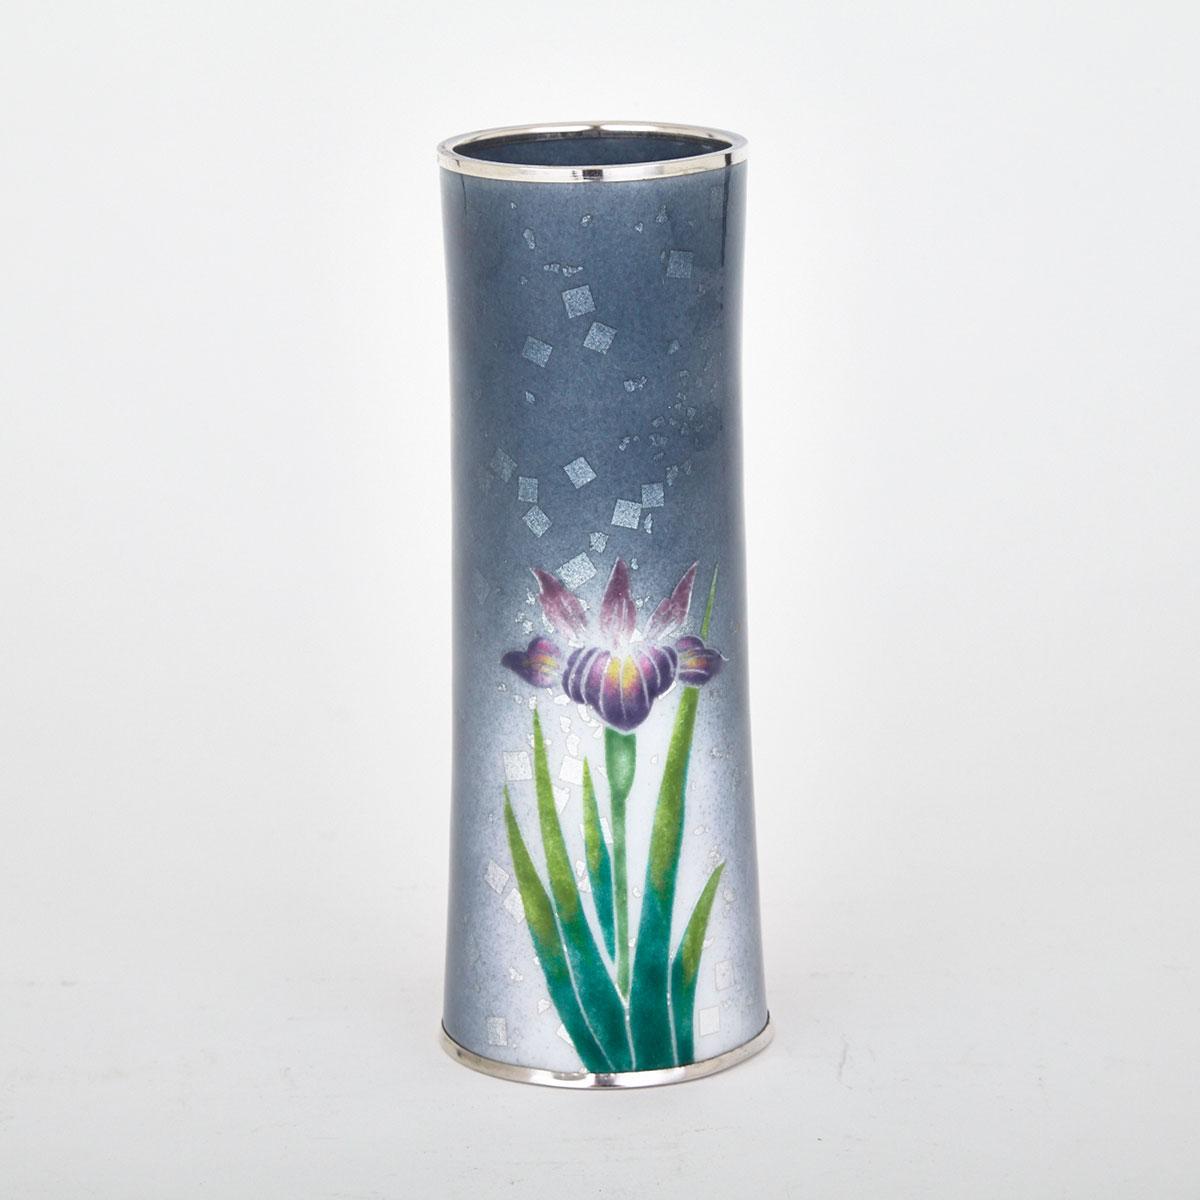 Enamel and Silver Floral Vase, Japan, Early 20th Century